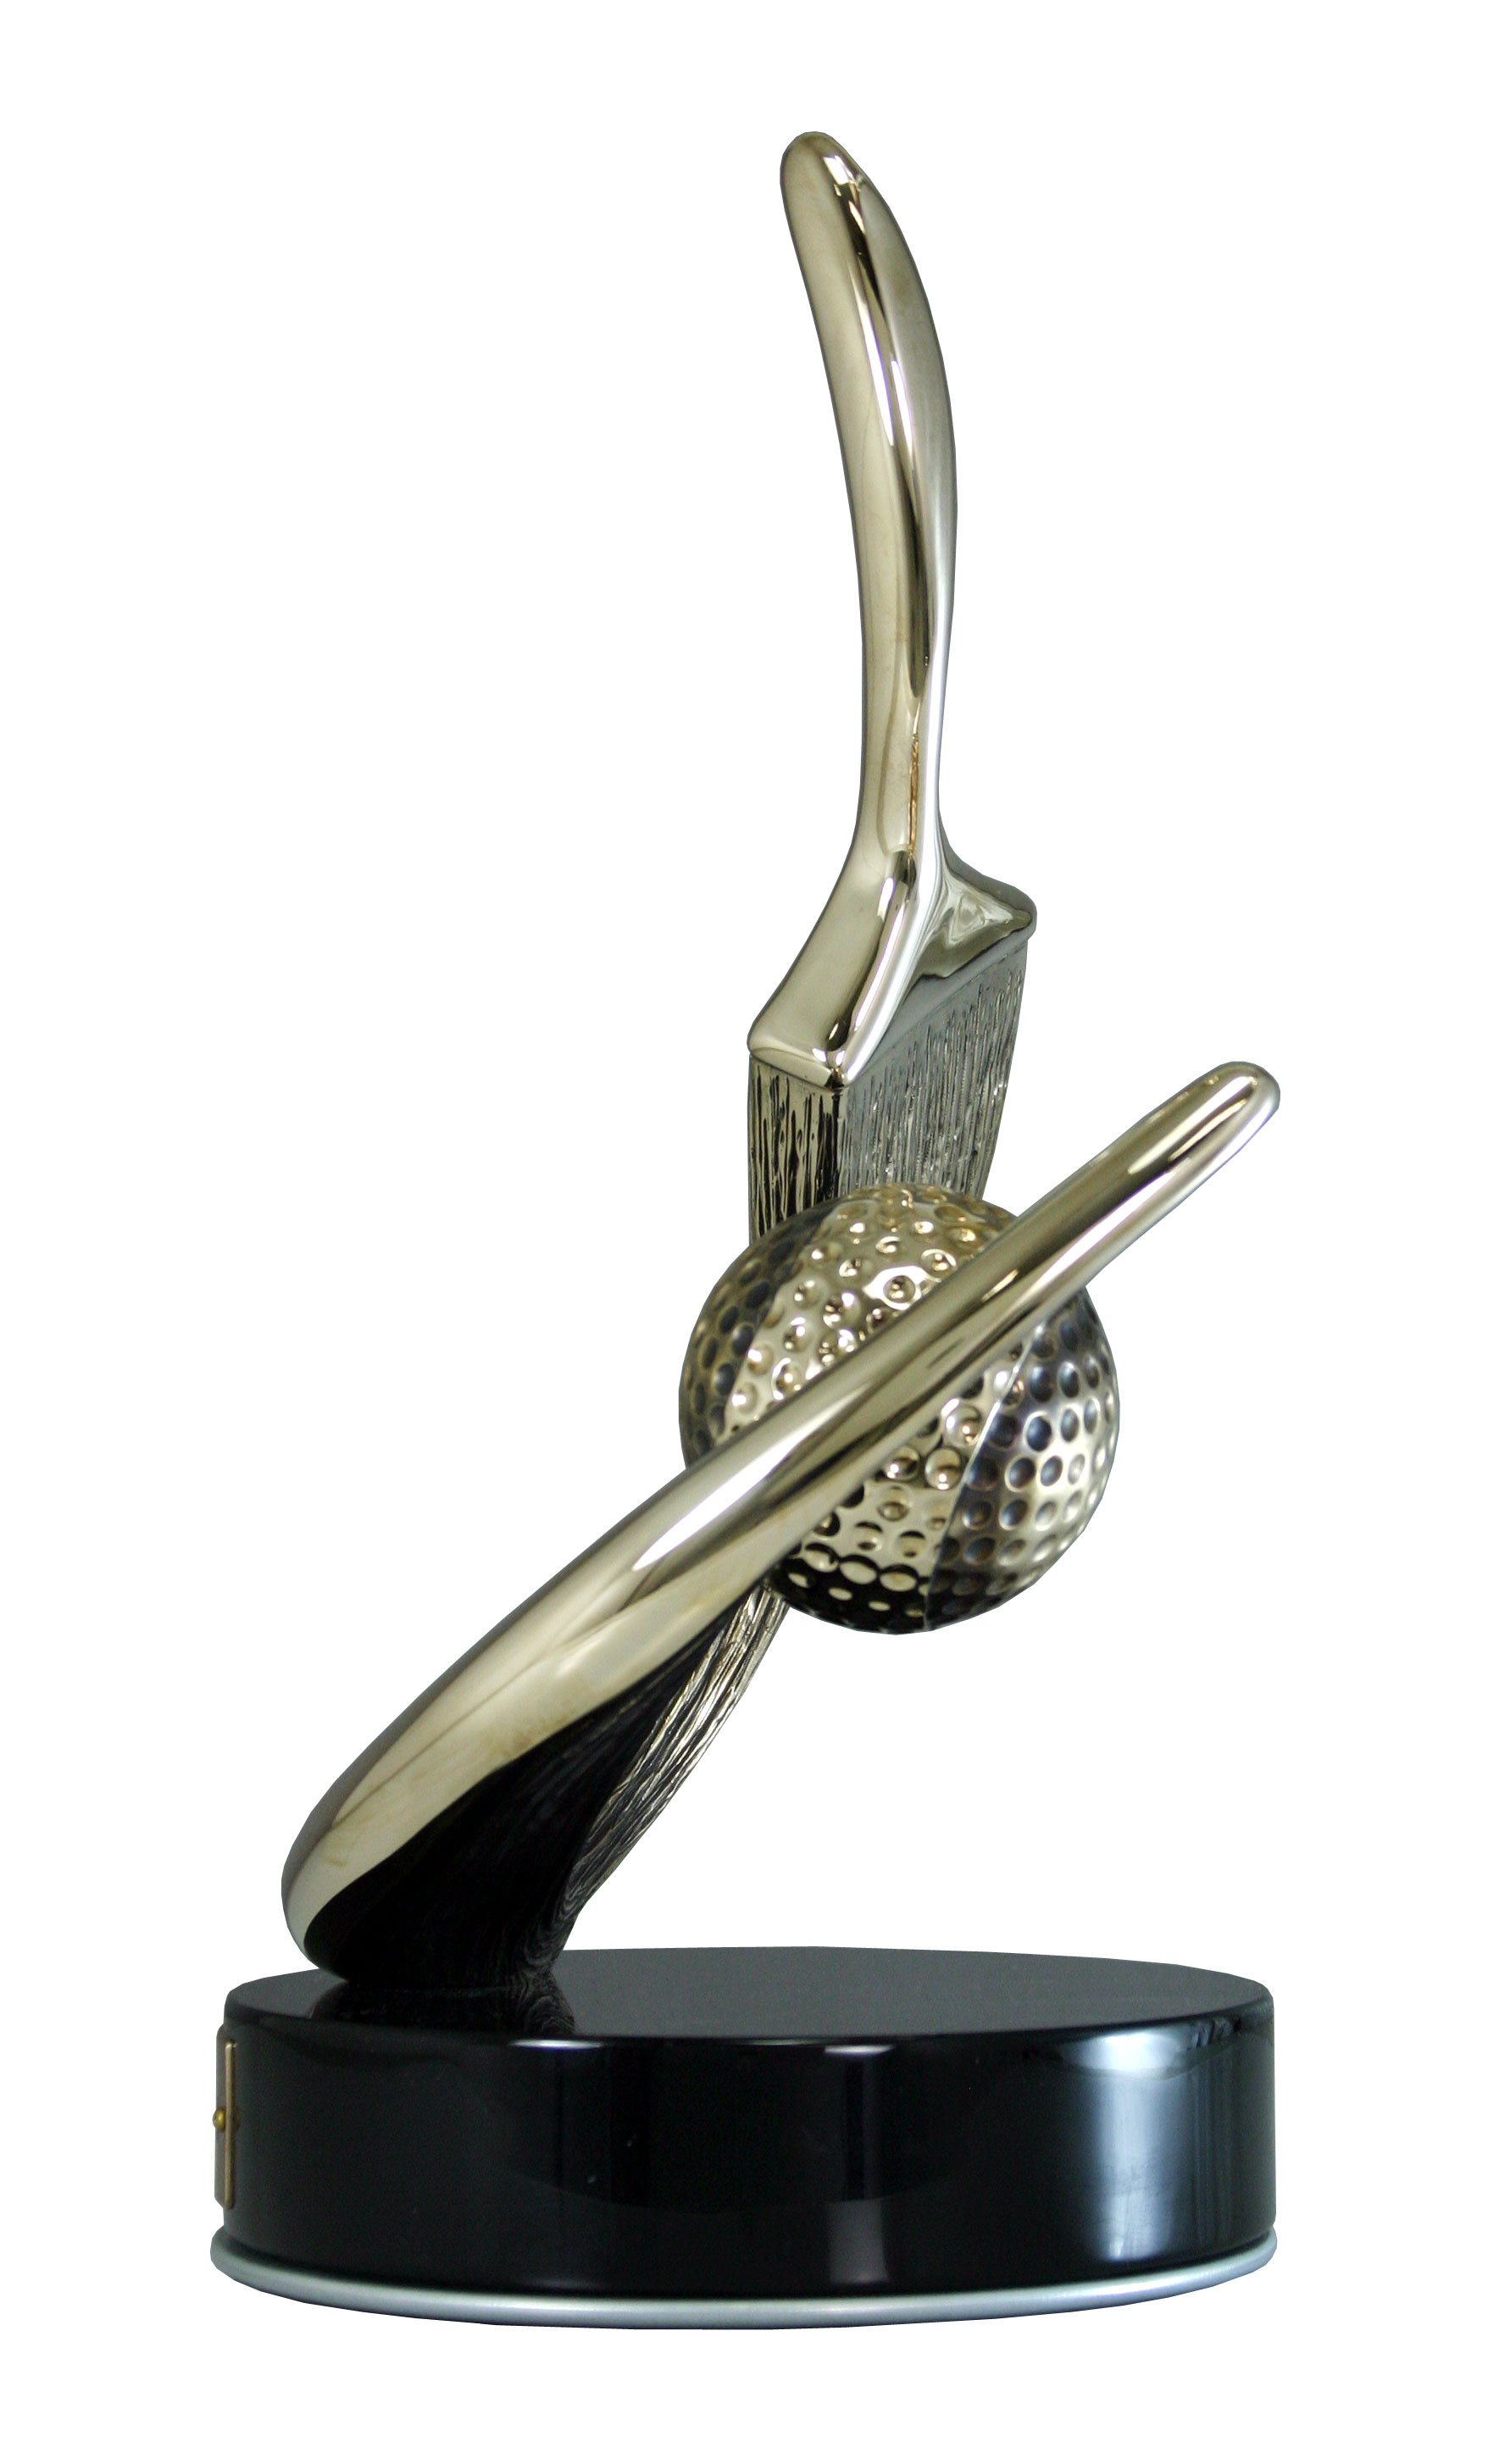 Valspar Championship Trophy made by Malcolm DeMille- Side View